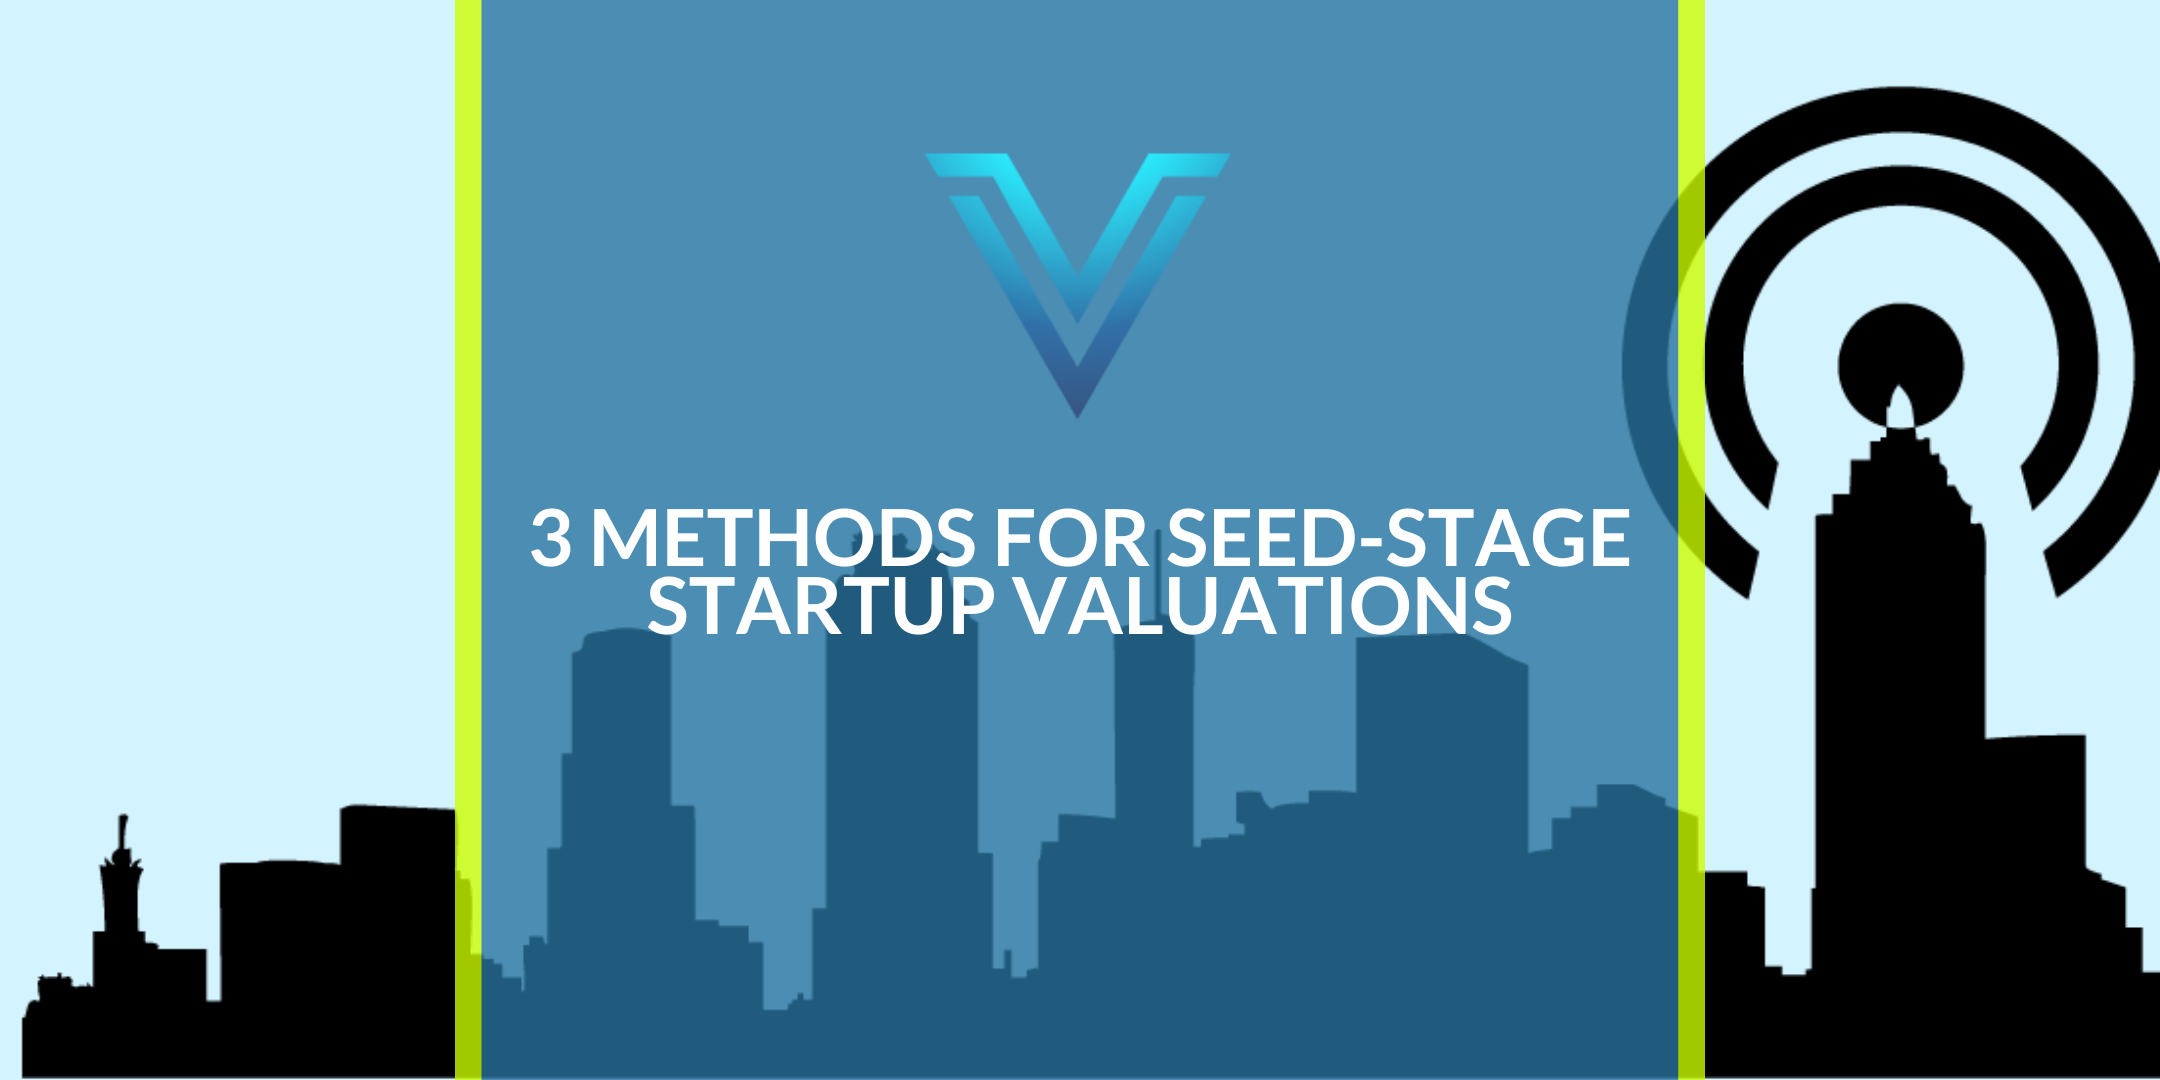 3 Methods for Seed-Stage Startup Valuations